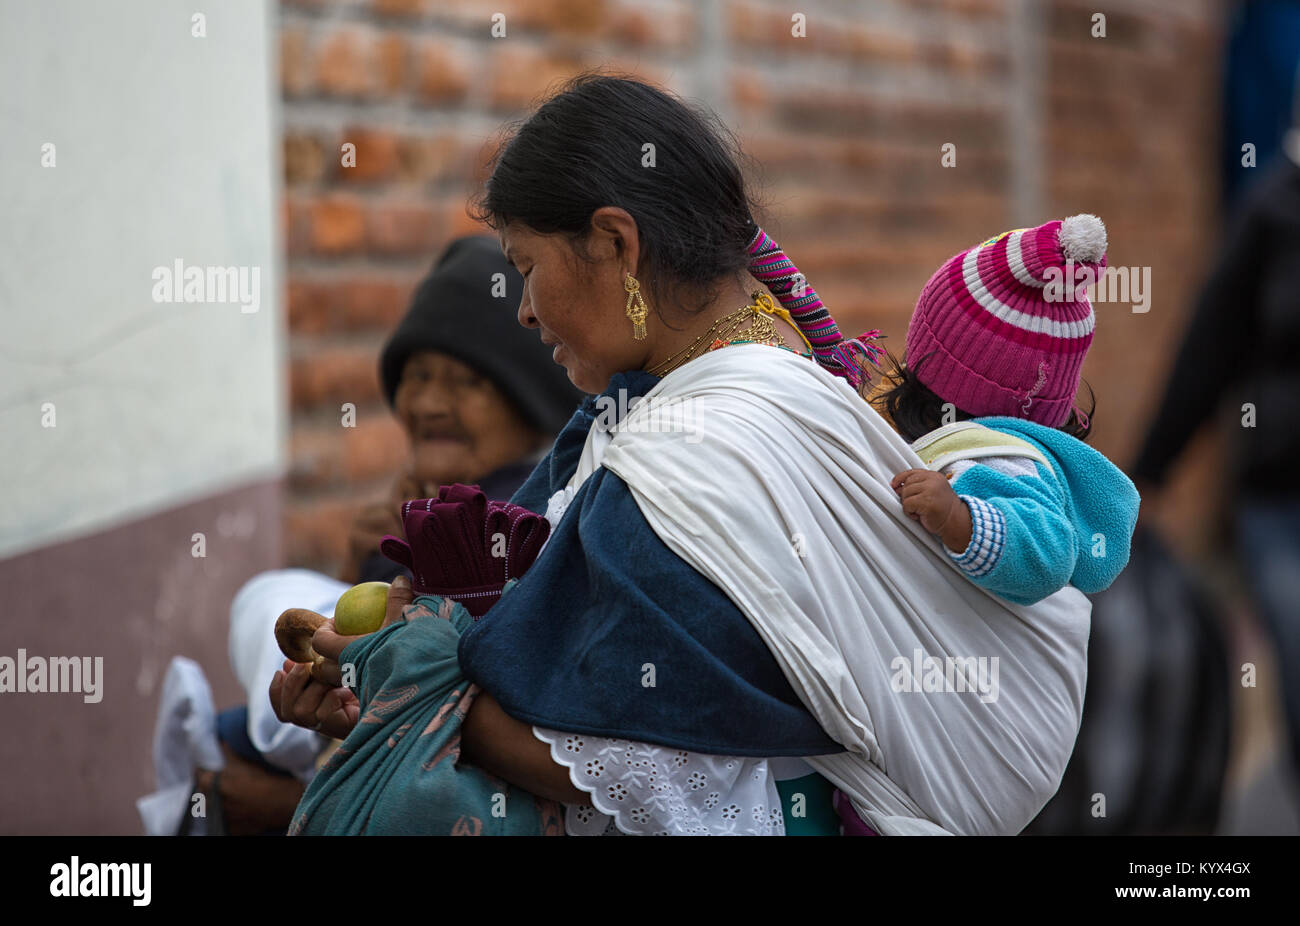 Otavalo, Ecuador - December 30, 2017: indigenous quechua woman carrying child on her back  in the local market Stock Photo